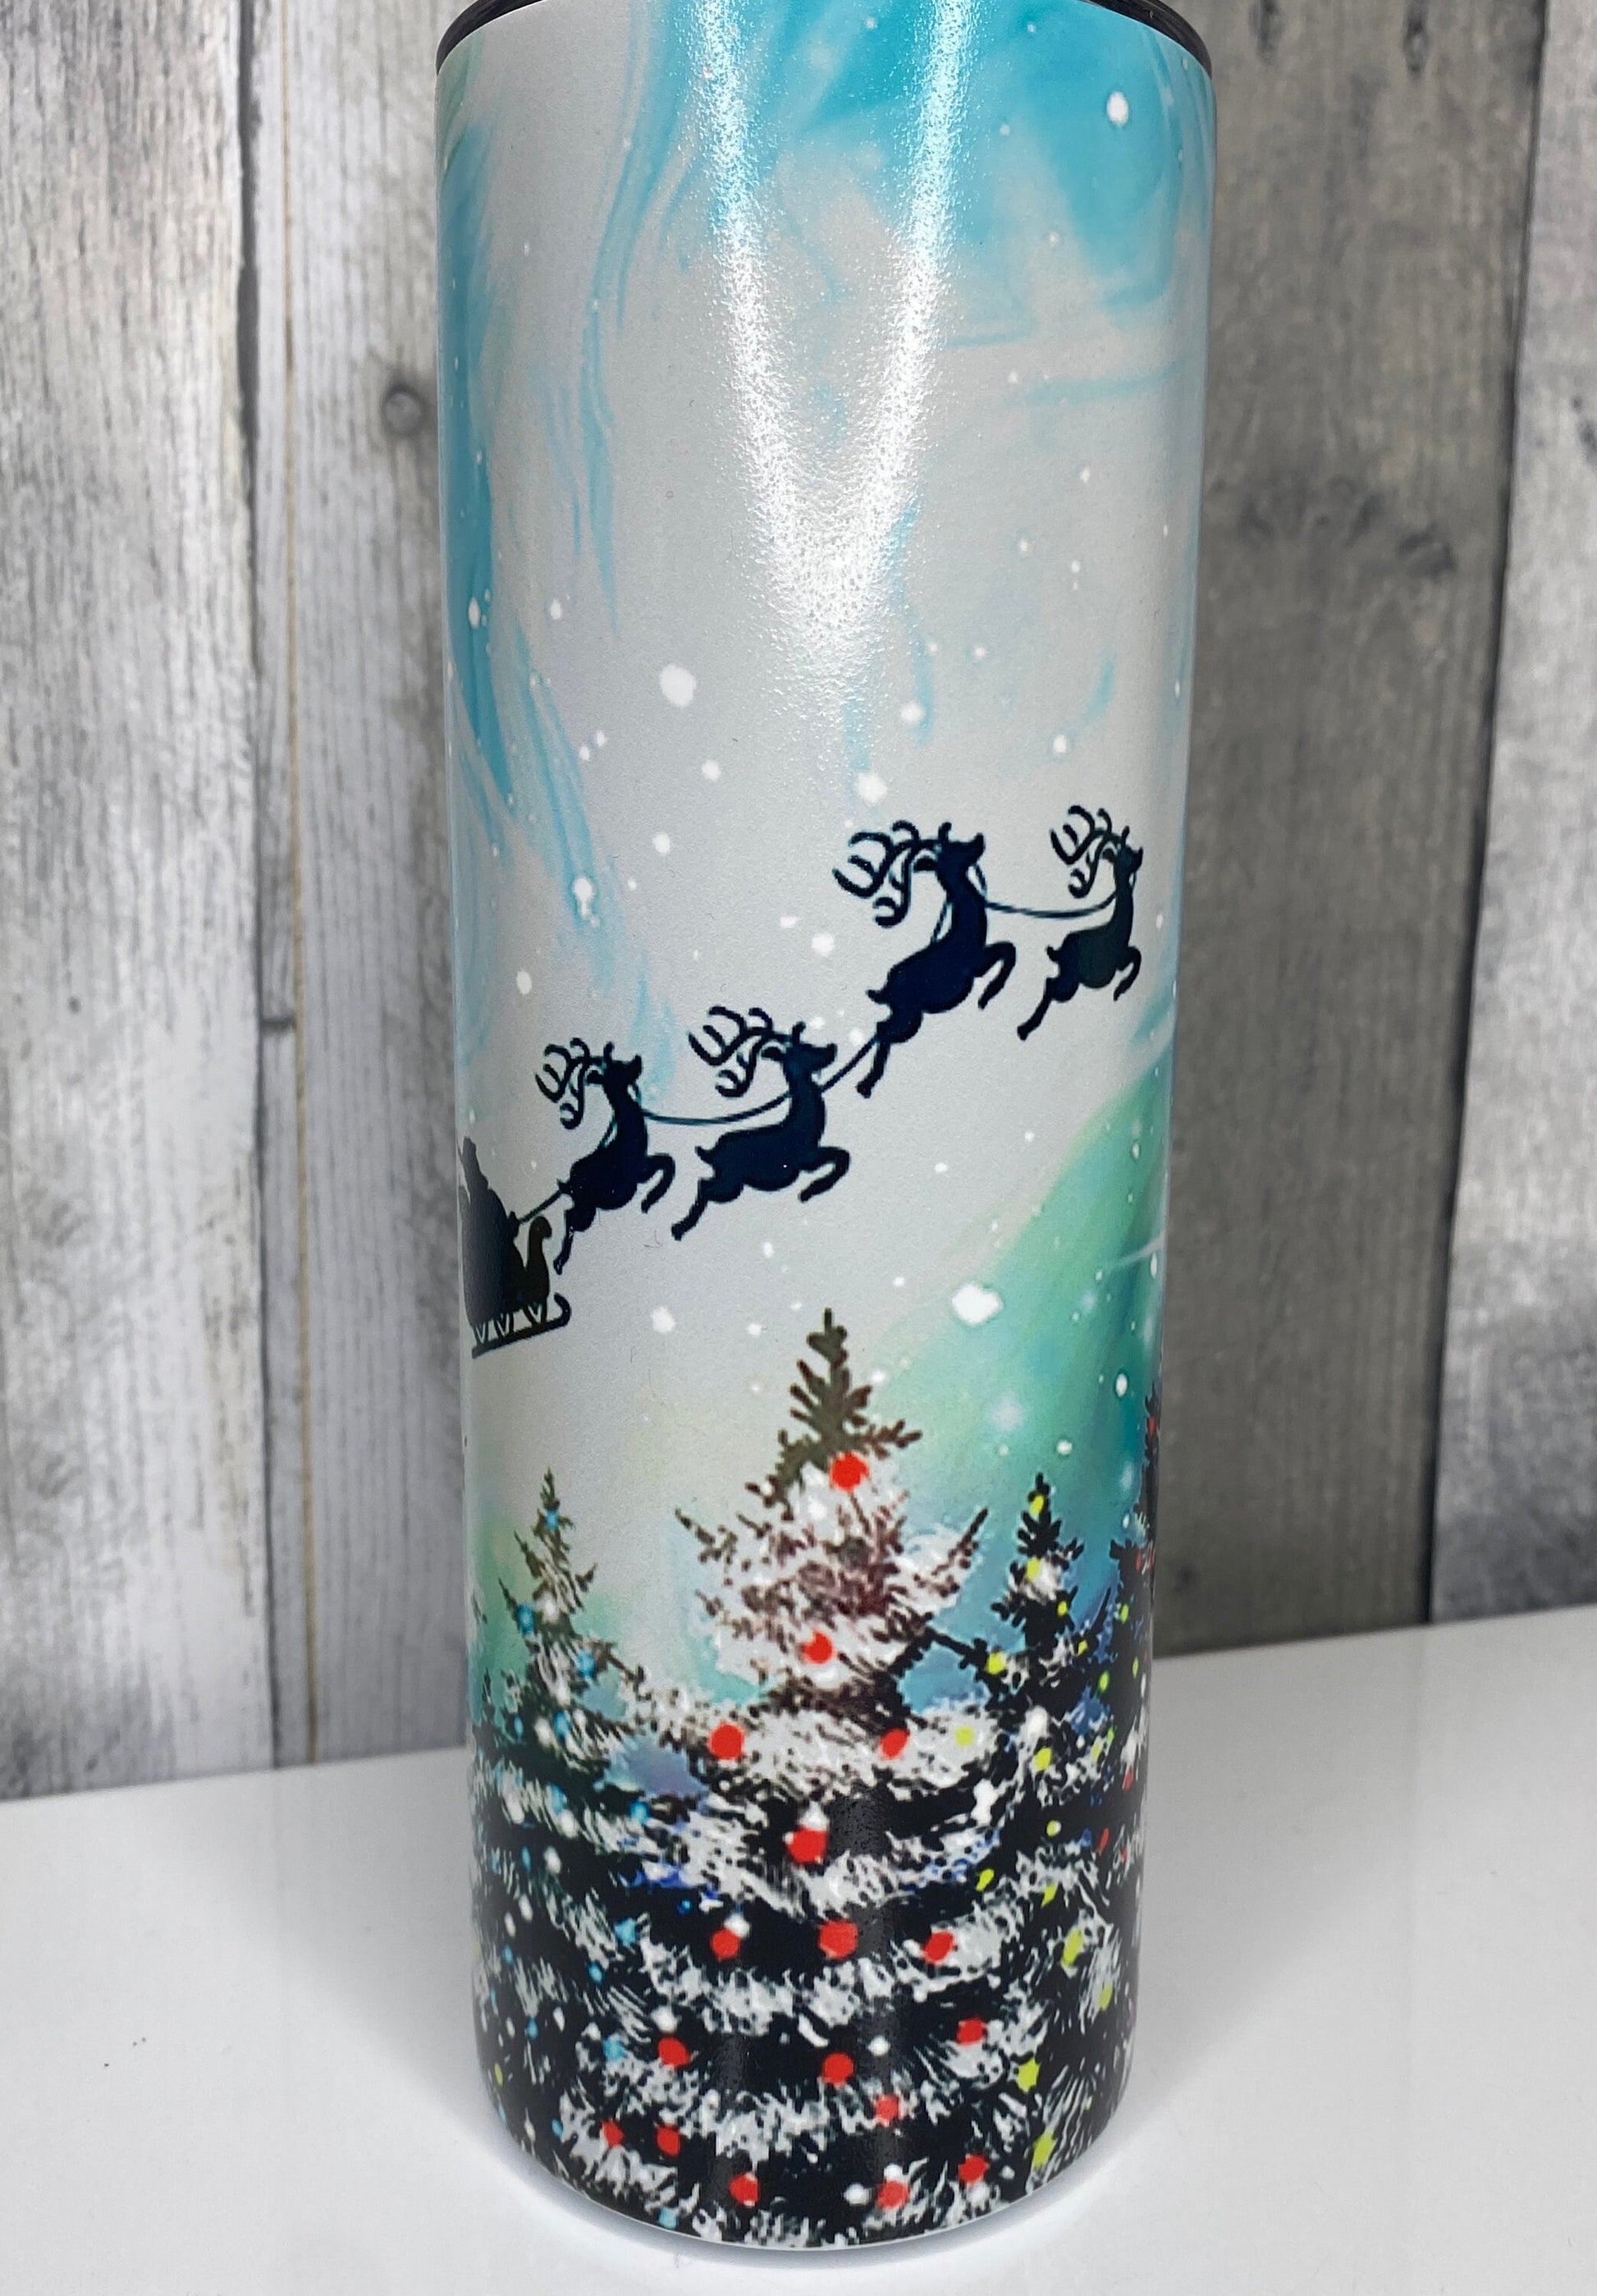 Northern Lights Santa's Sleigh, Glossy or Glow in the Dark, Glow Tumbler, Christmas Gifts, Insulated Travel Cup, Sublimation